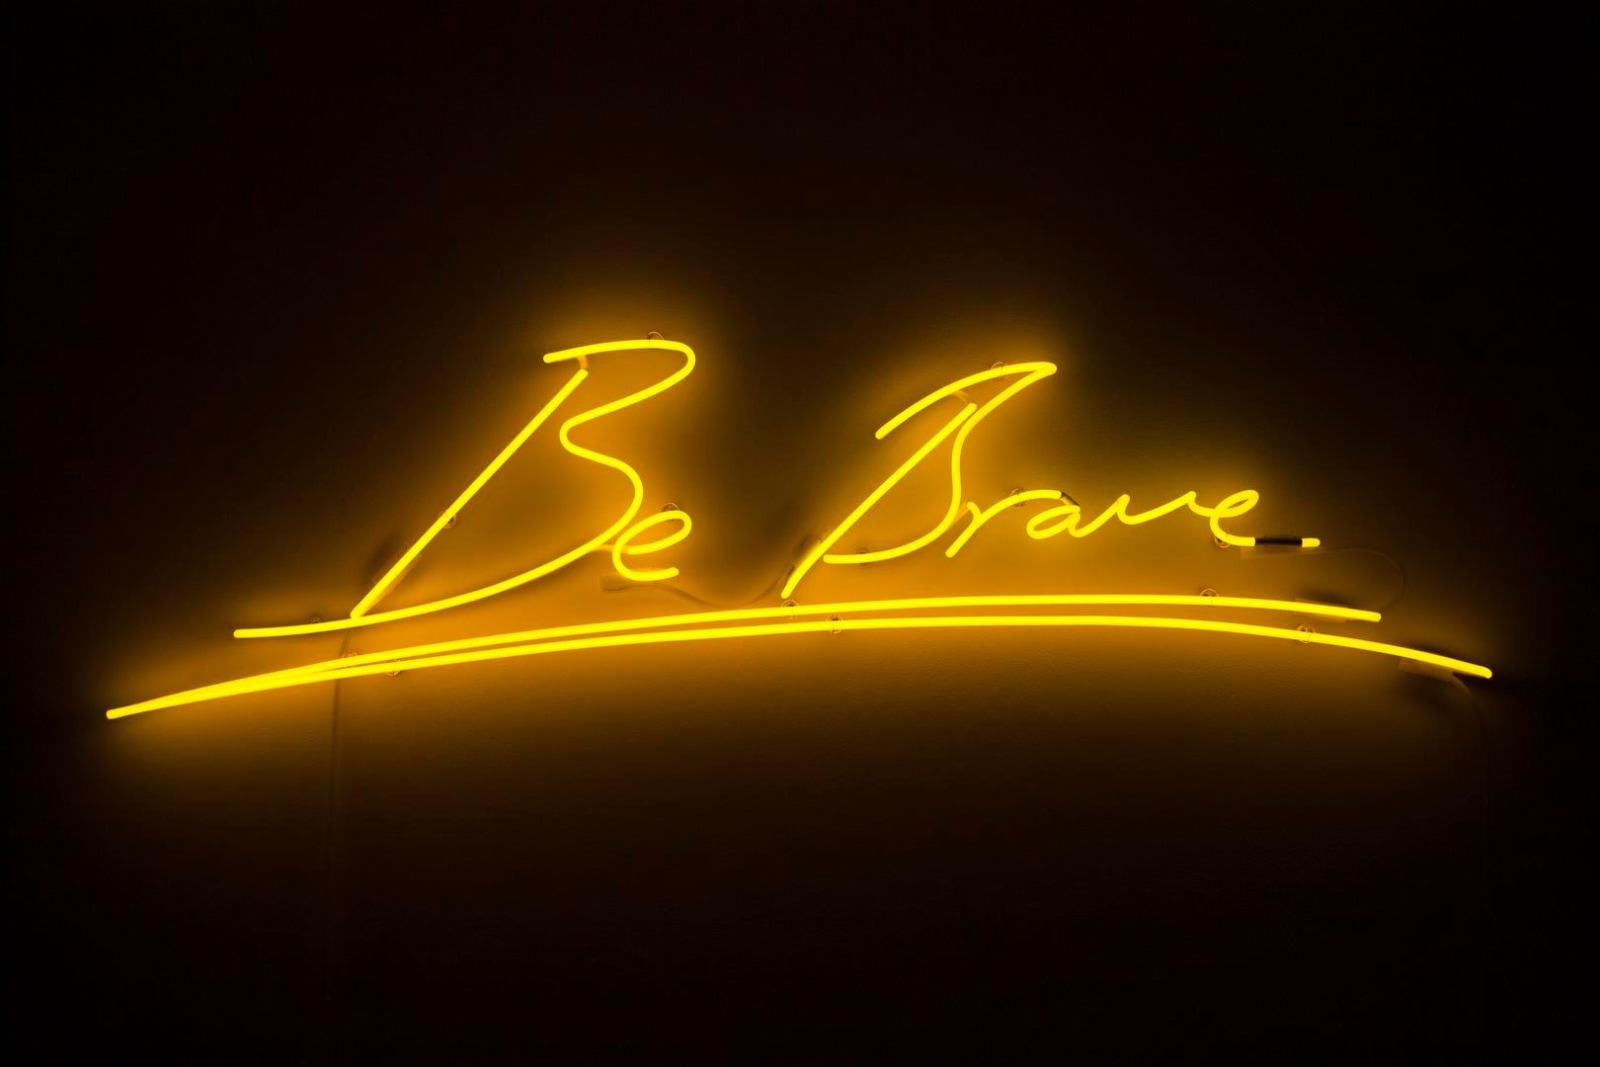  Tracey Emin, Be Brave (2014), neon, 38.1 x 139 cm, edition of 10. Courtesy the artist and Lehmann Maupin, New York and Hong Kong.